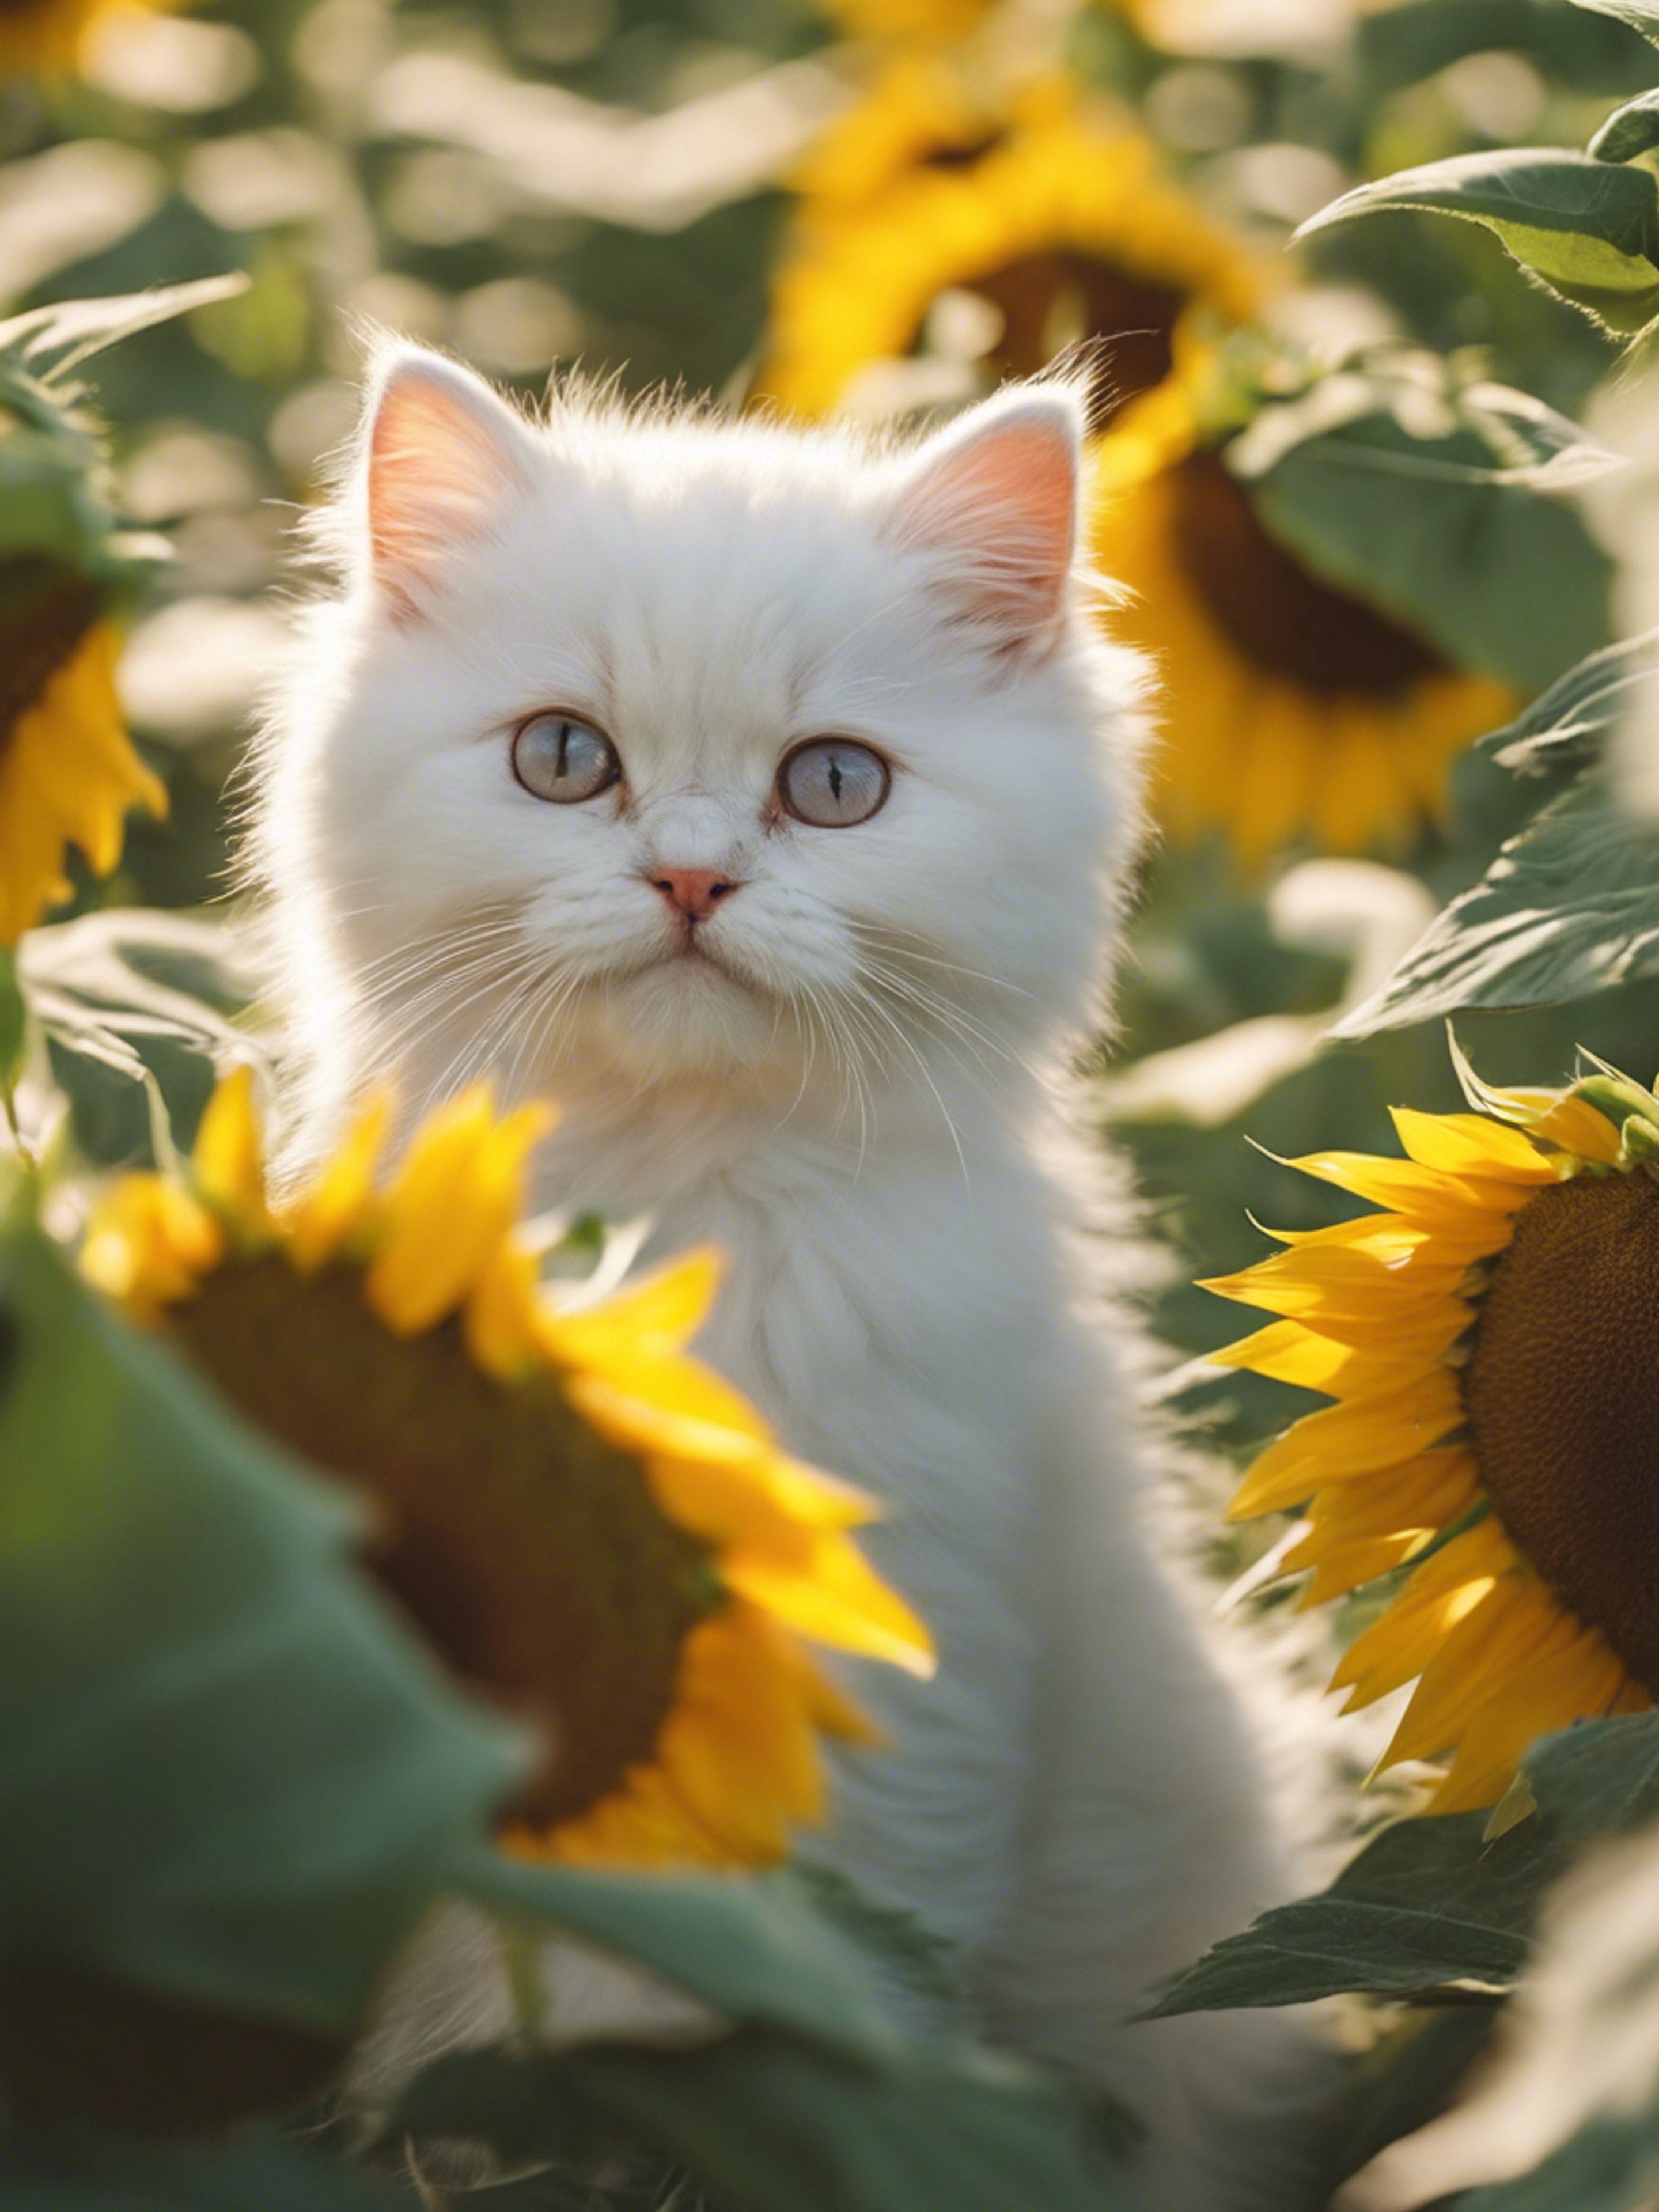 A snow-white Persian kitten playing peek-a-boo among a field of sunflowers on a bright, sunny day. Tapeta[783f0584fefb42ff9955]